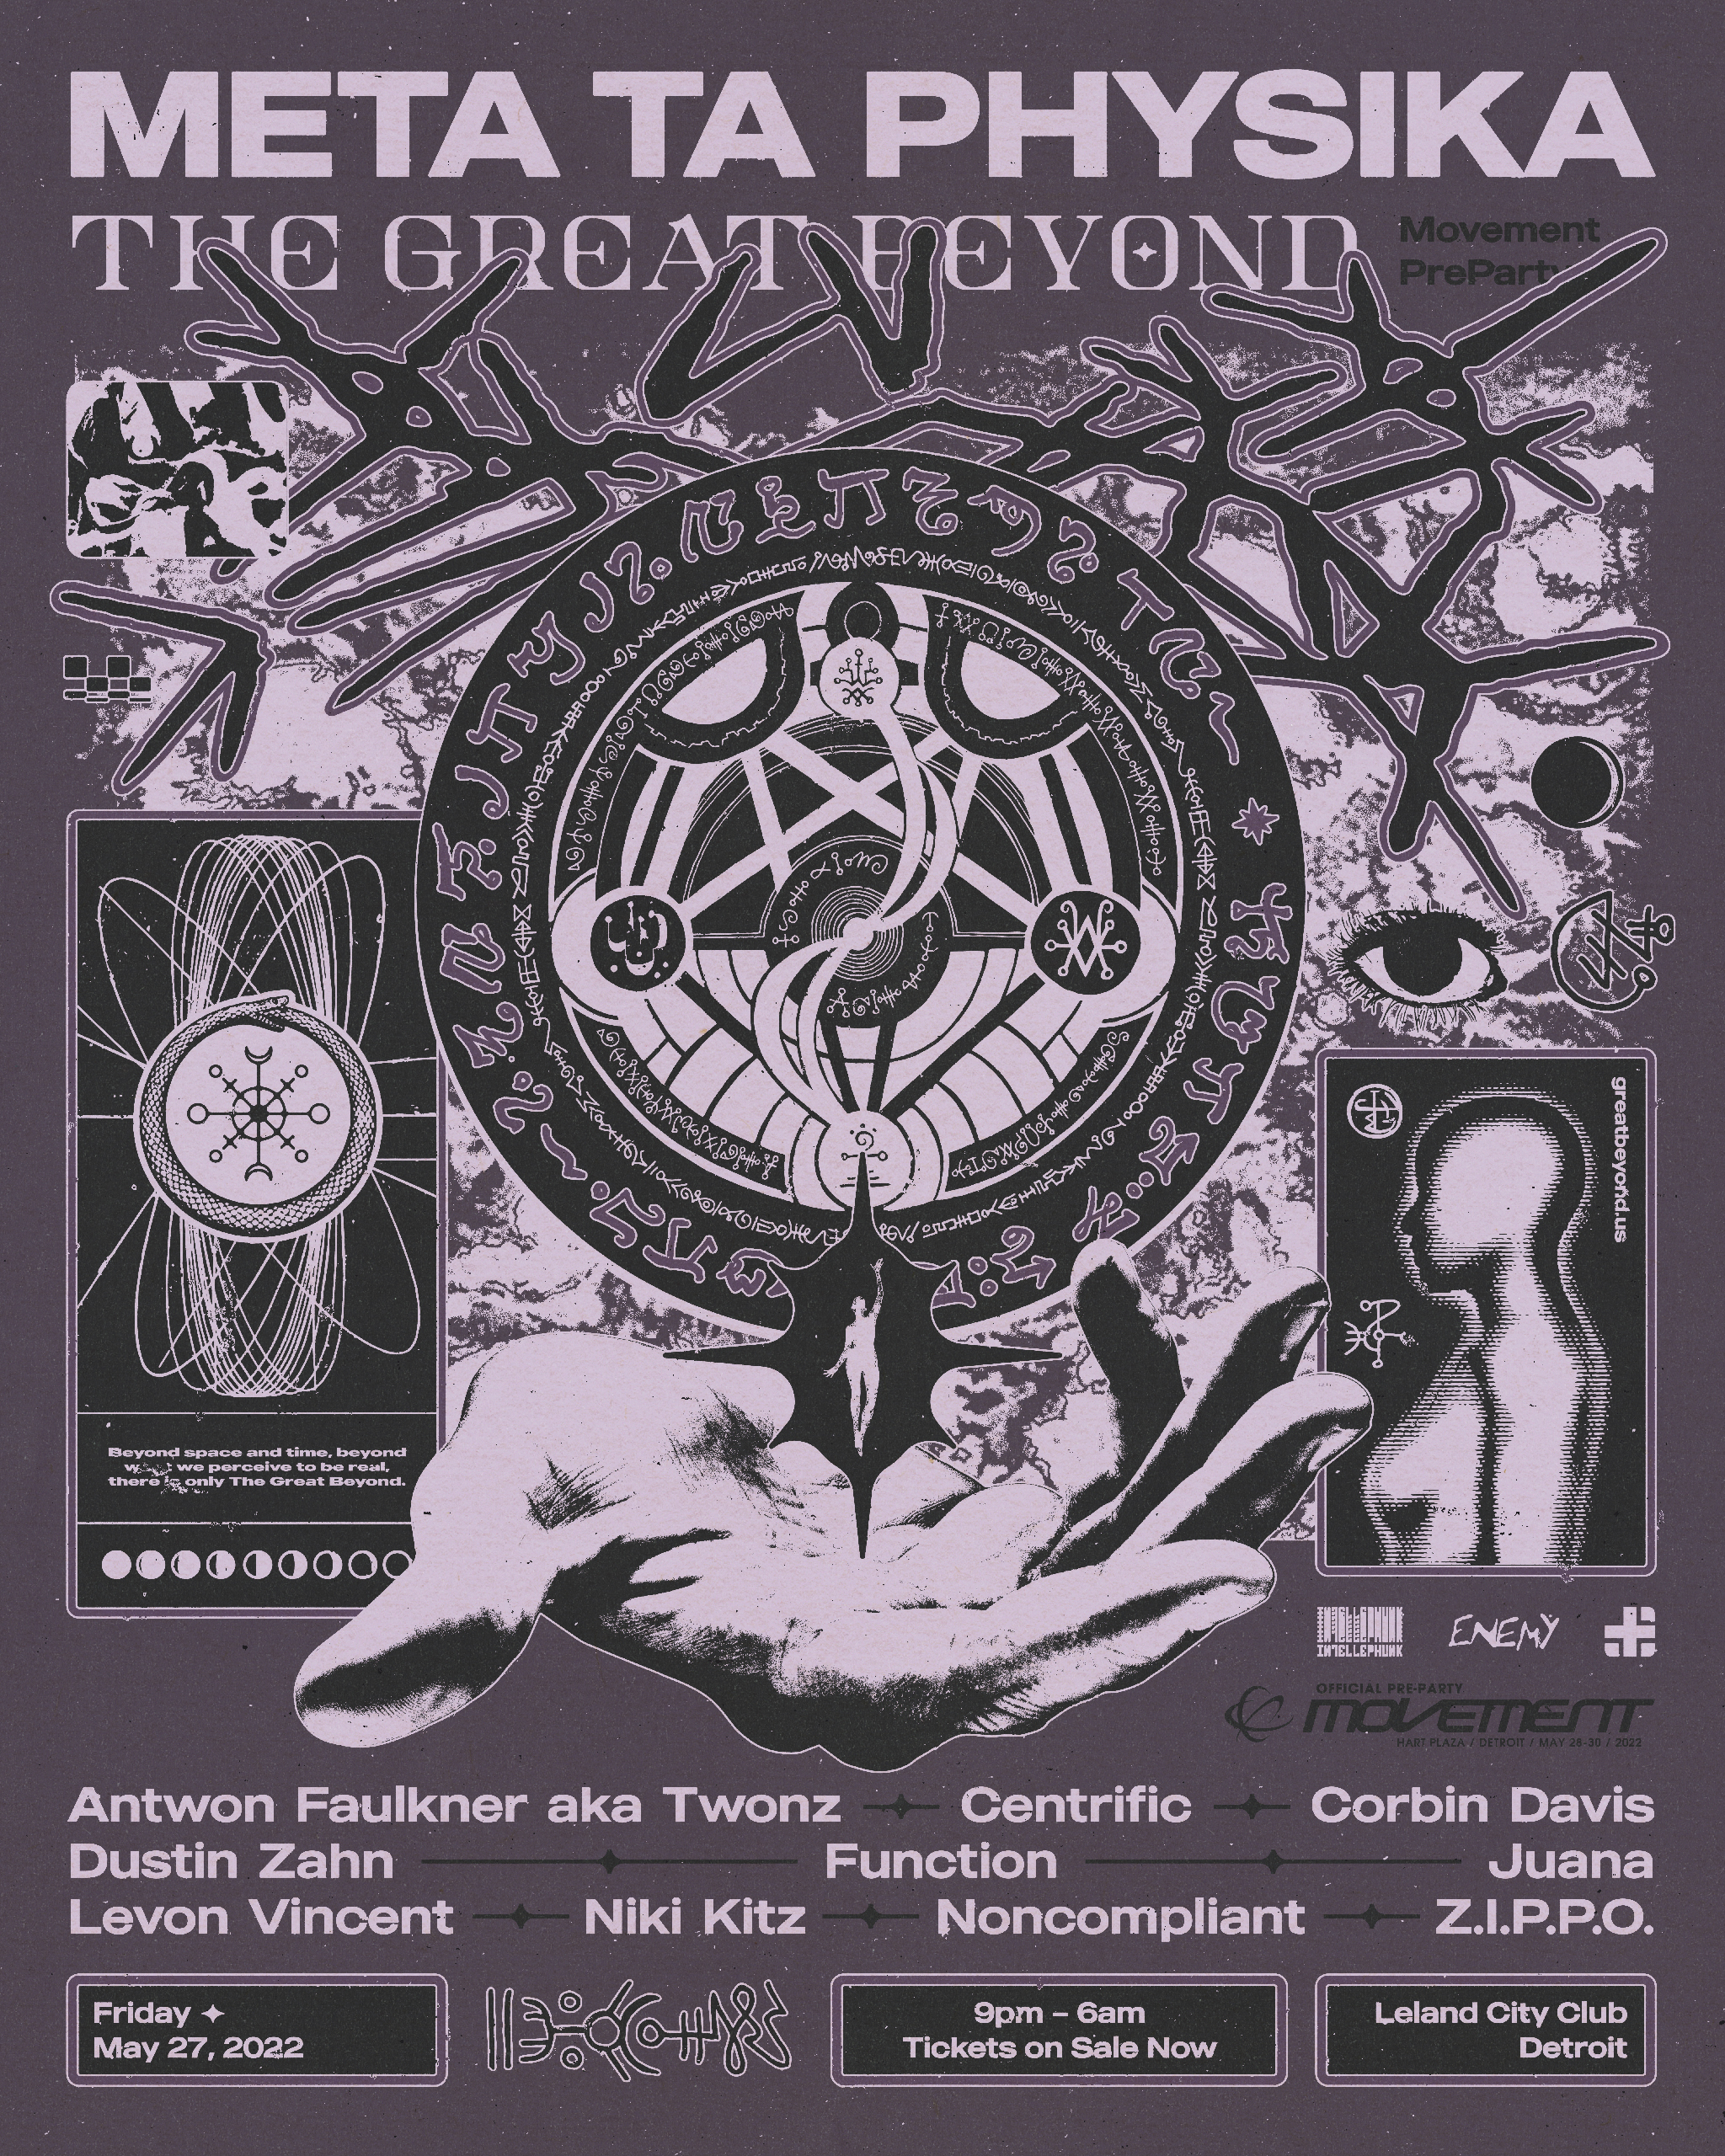 The Great Beyond Lineup